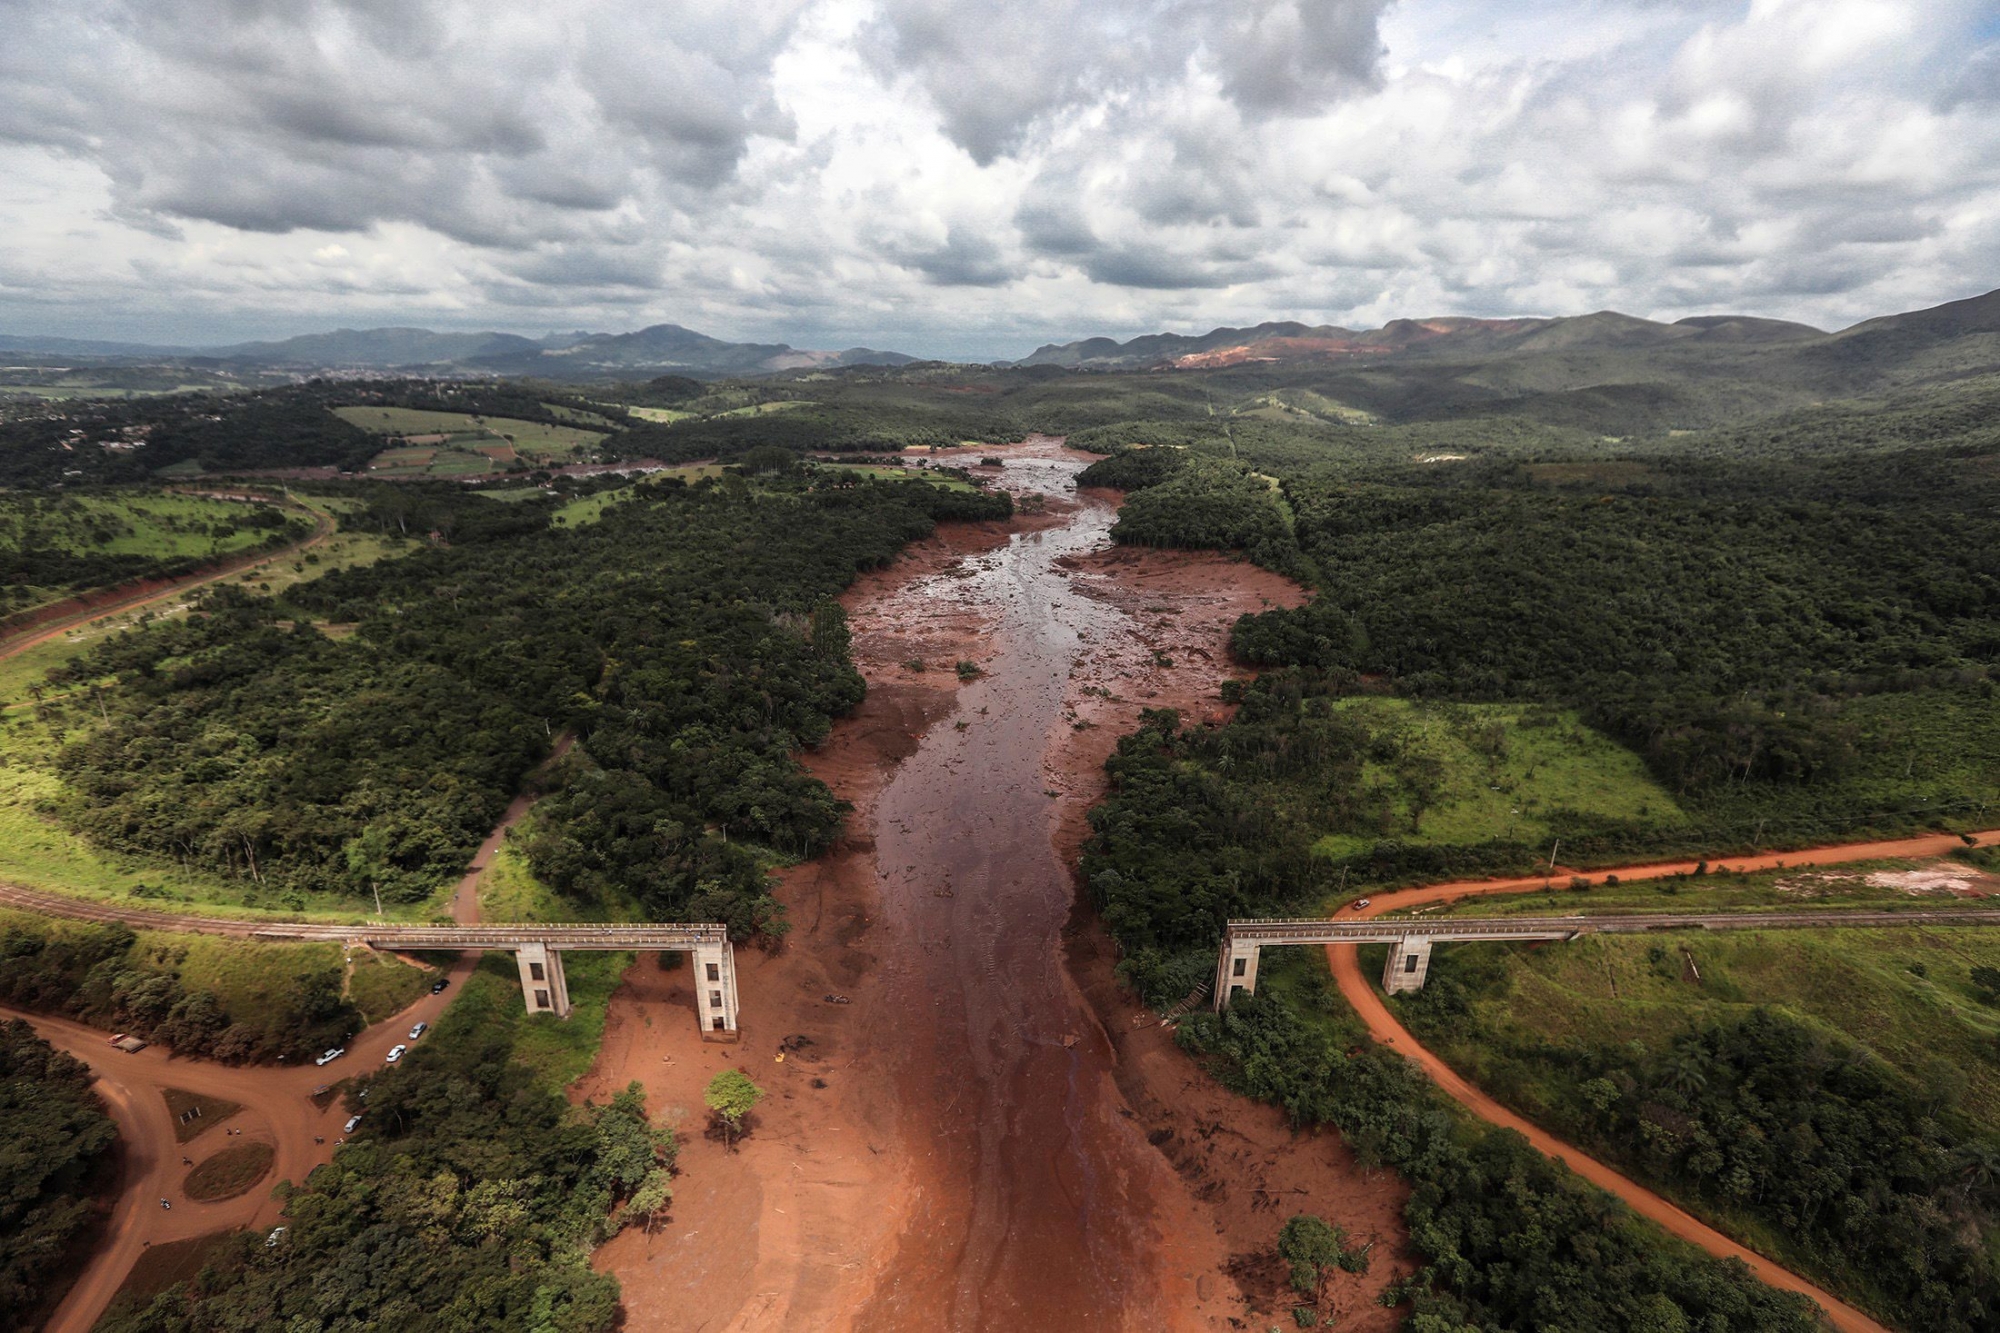 epa07322444 Aerial view over mud and waste from the disaster caused by dam spill in Brumadinho, Minas Gerais, Brazil, 26 January 2019. At least nine people have died and 300 are missing after a tailings dam burst at the Feijao mine in southeastern Brazil owned by Vale, the world's largest iron-ore producer, the Minas Gerais state government said. The dam in Brumadinho near Belo Horizonte broke on 25 January at around mid-day, unleashing a river of sludge that destroyed some nearby houses.  EPA/Antonio Lacerda BRAZIL DISASTERS DAM BURST